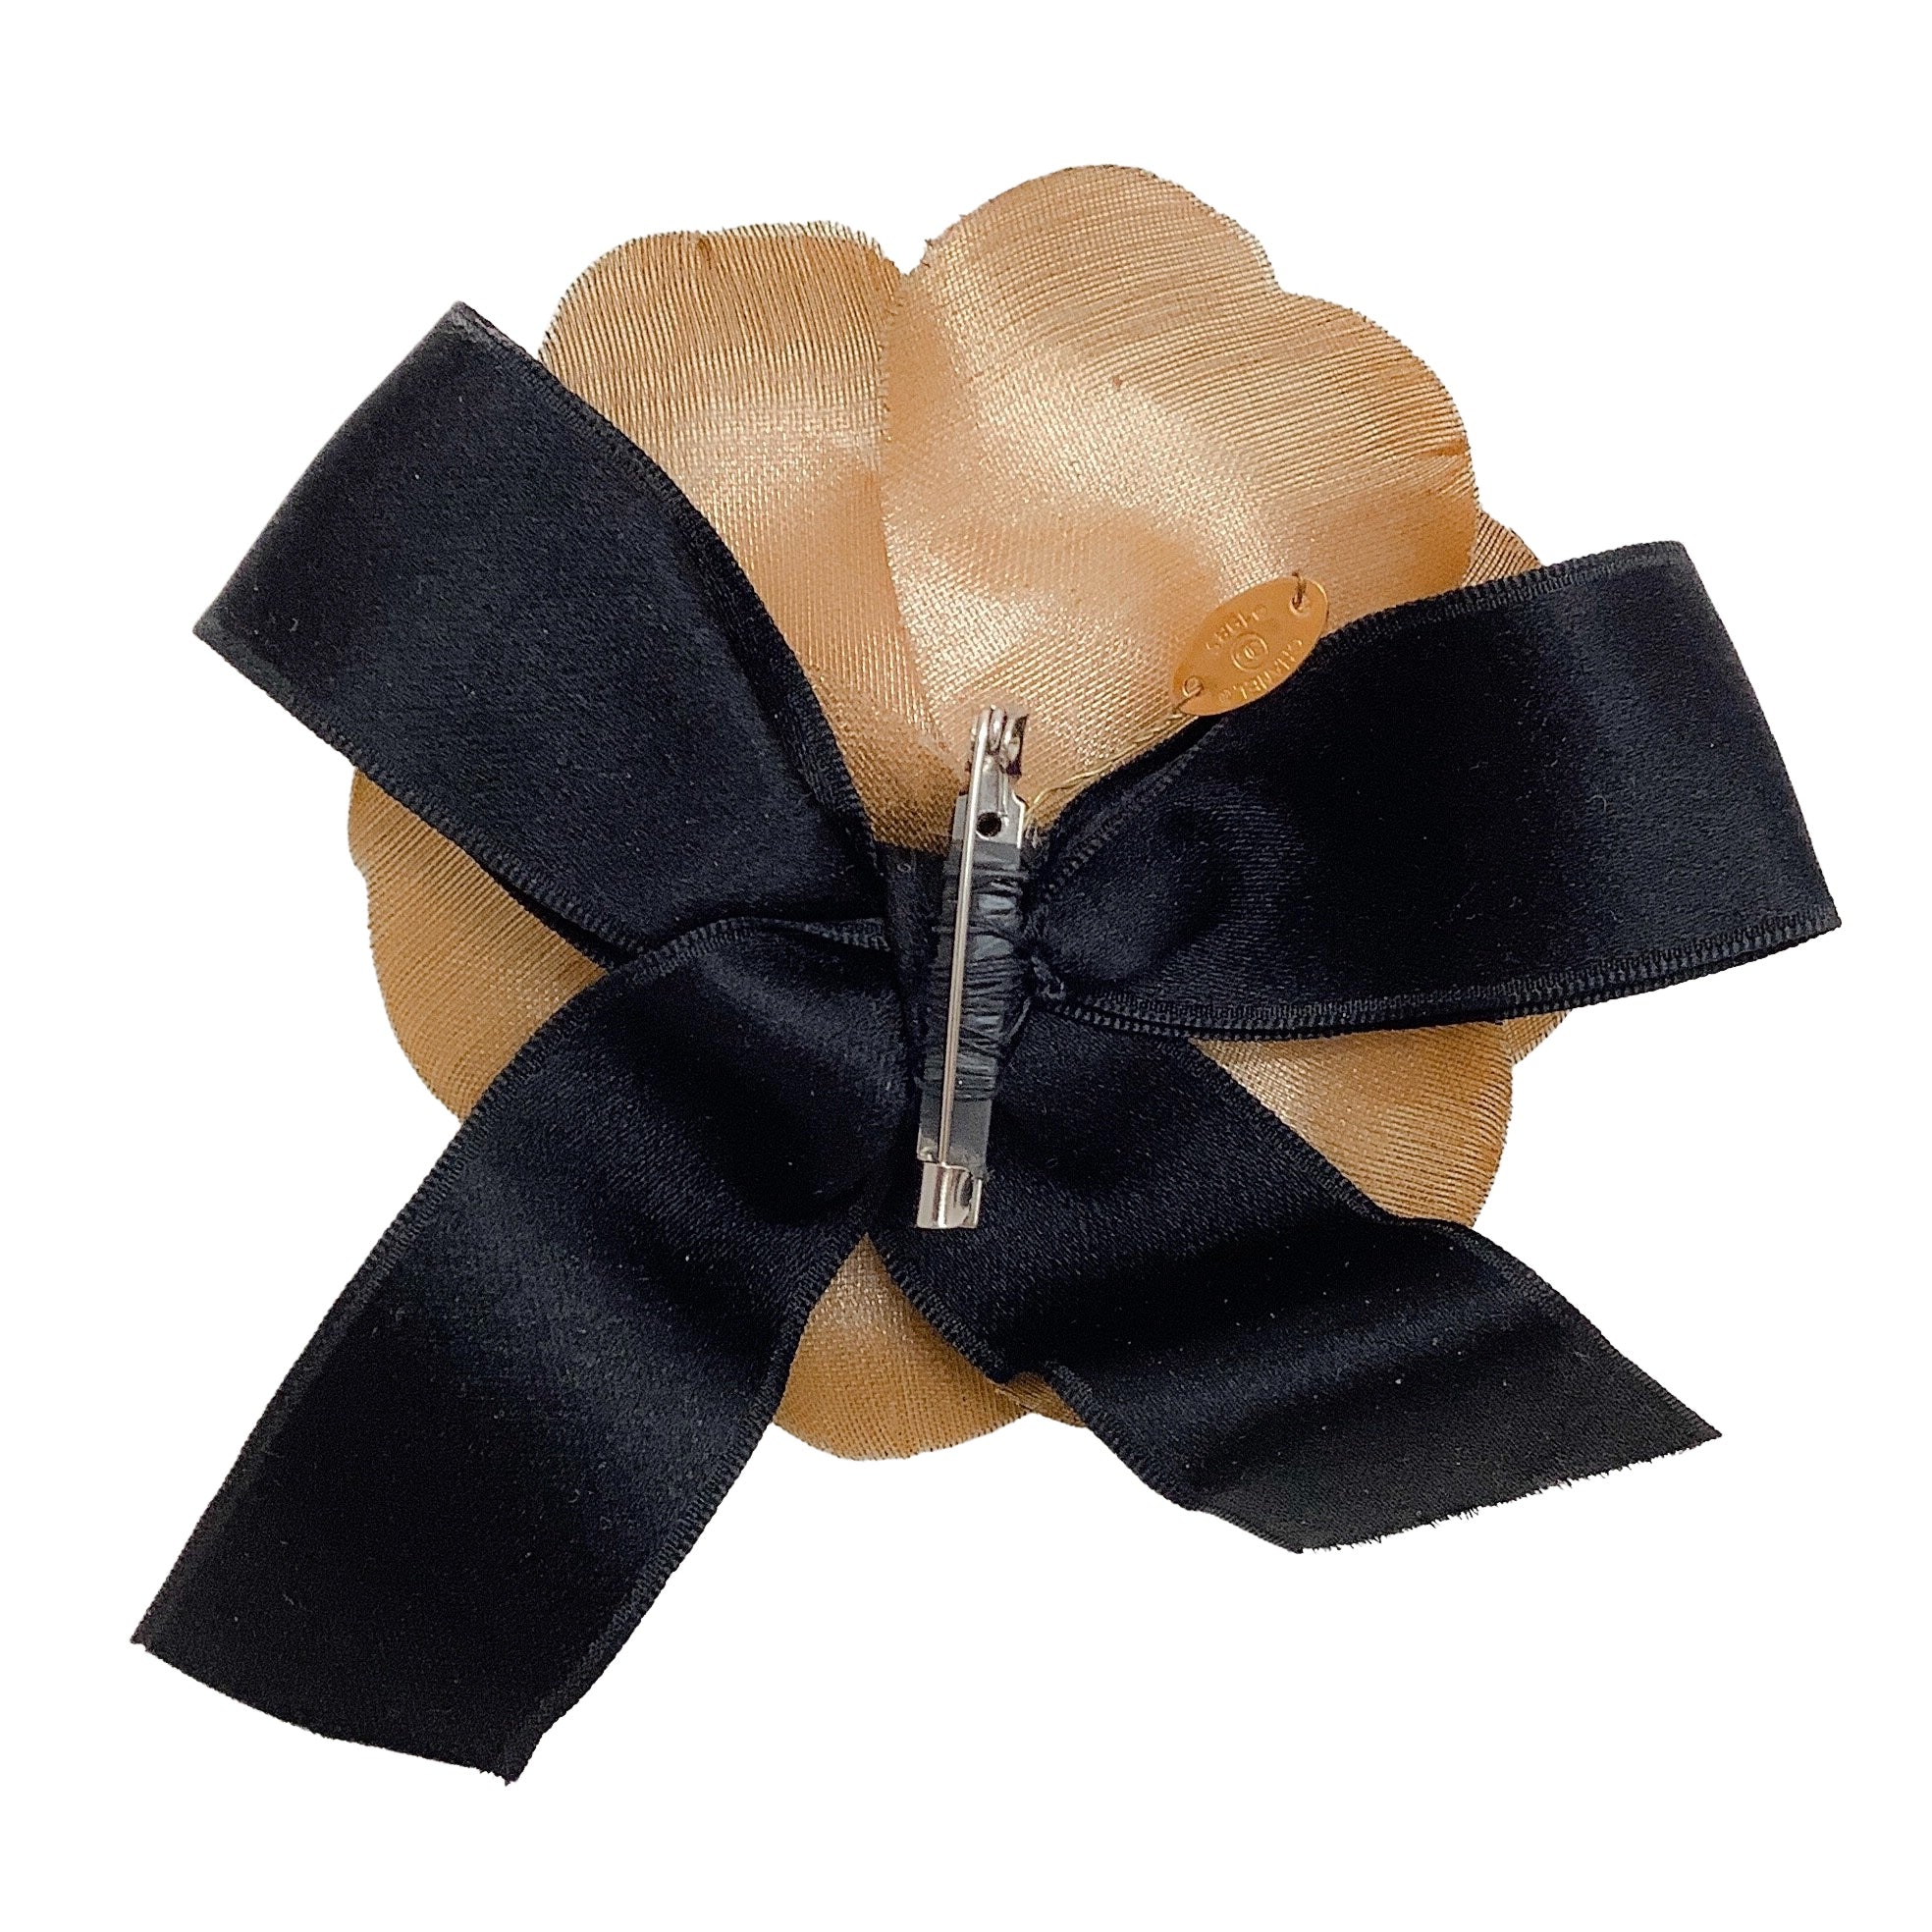 Chanel Vintage 1985 Gold Fabric Camellia Brooch With Black Satin Bow